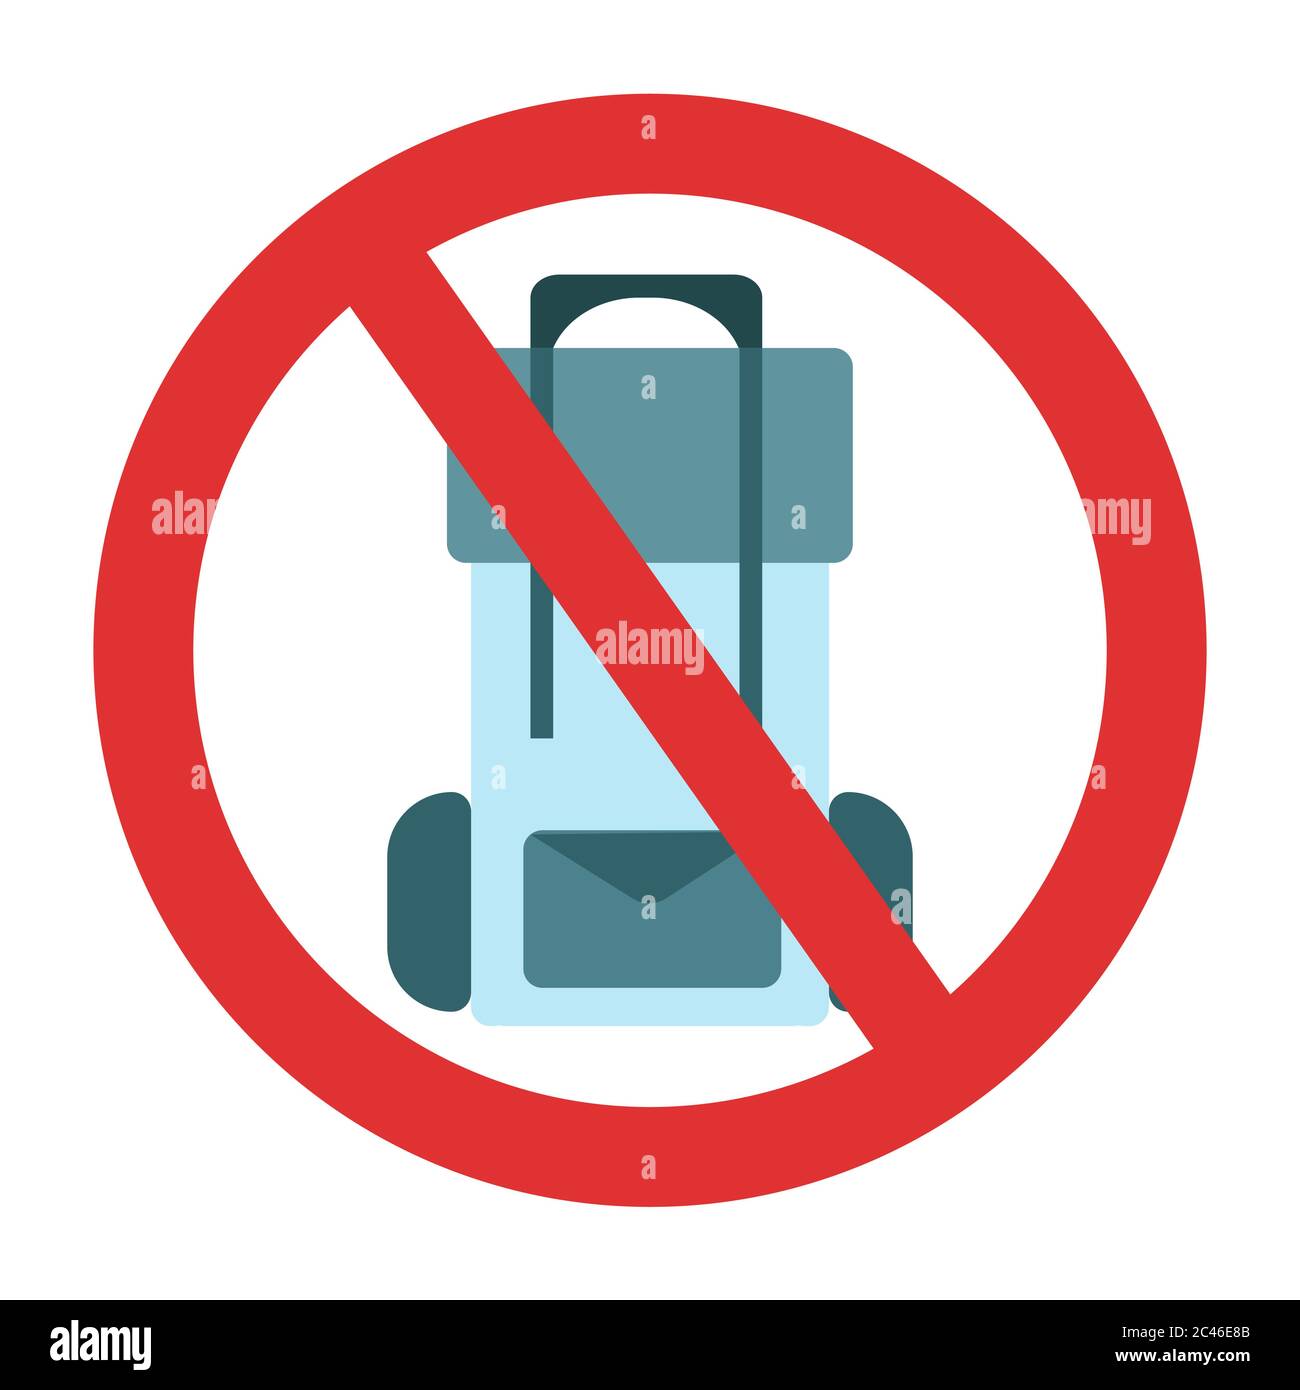 Ban on luggage. Travel bag ban. Stop travel isolated illustration. Stay home COVID-19 prevention. Stock Vector